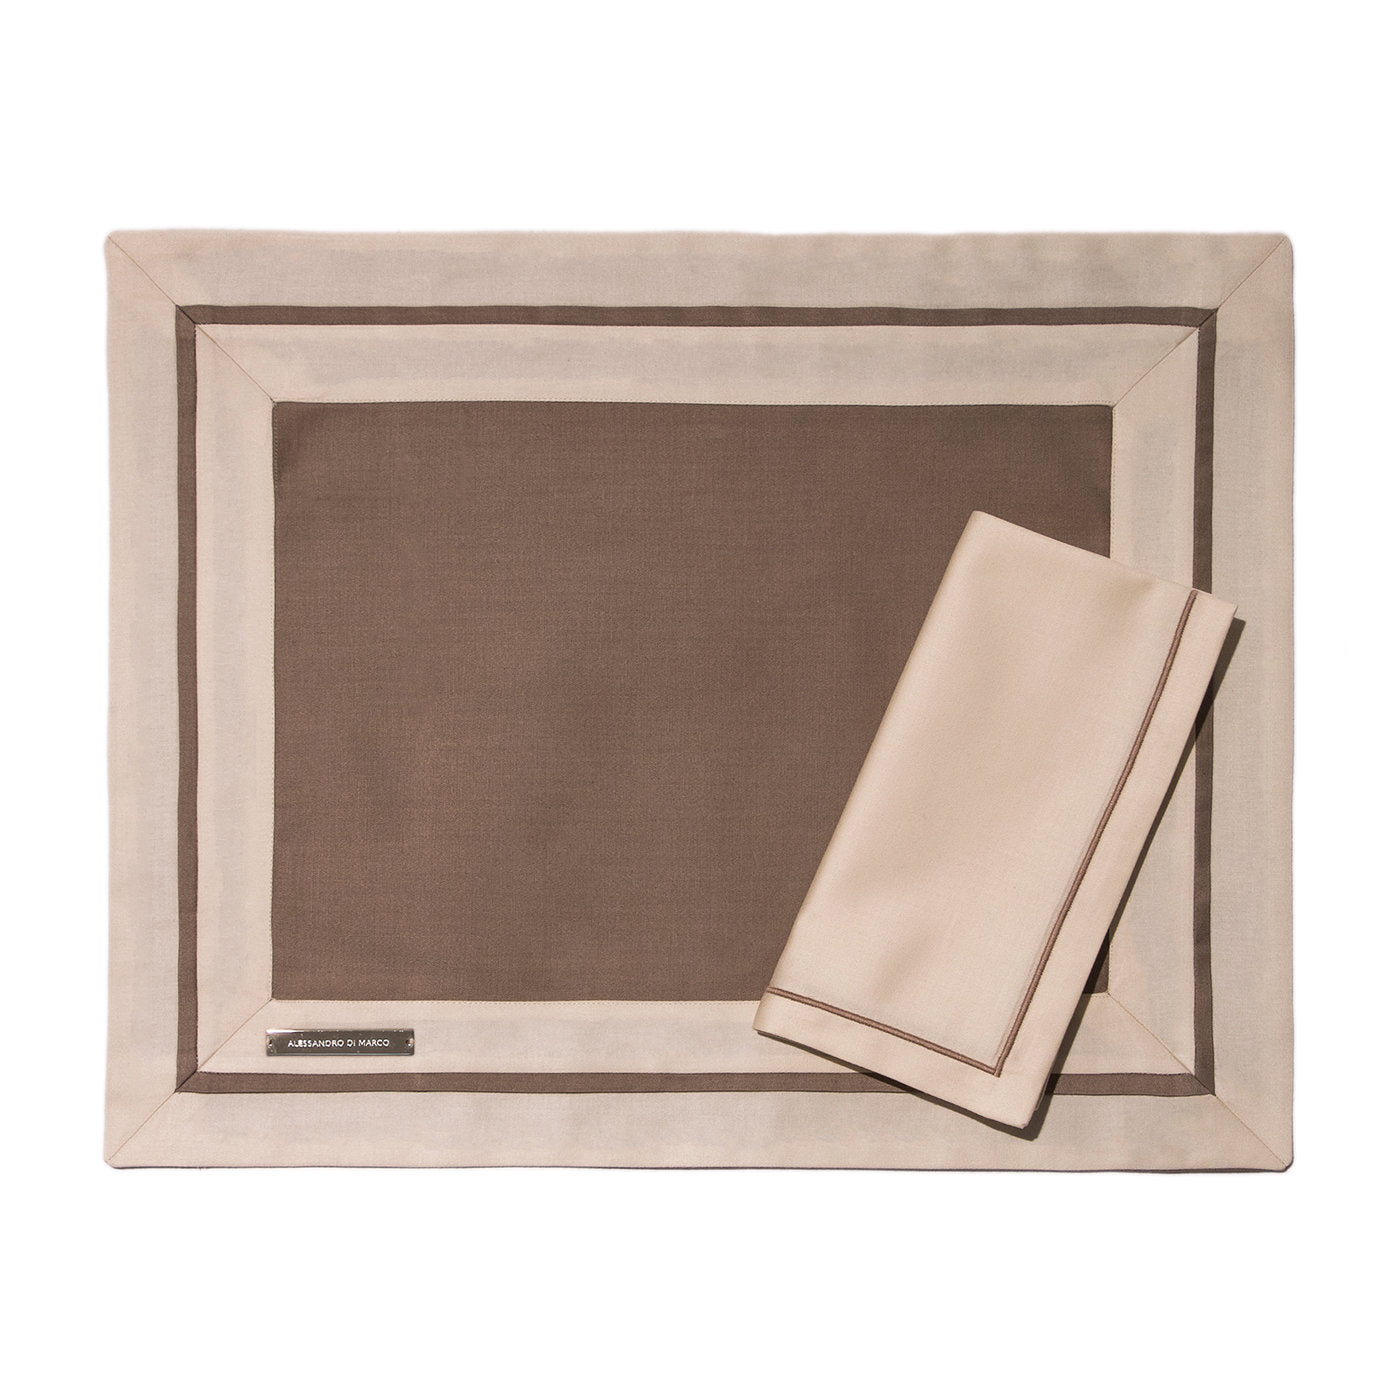 Placemats and Napkins - Beige - Alternative view 1